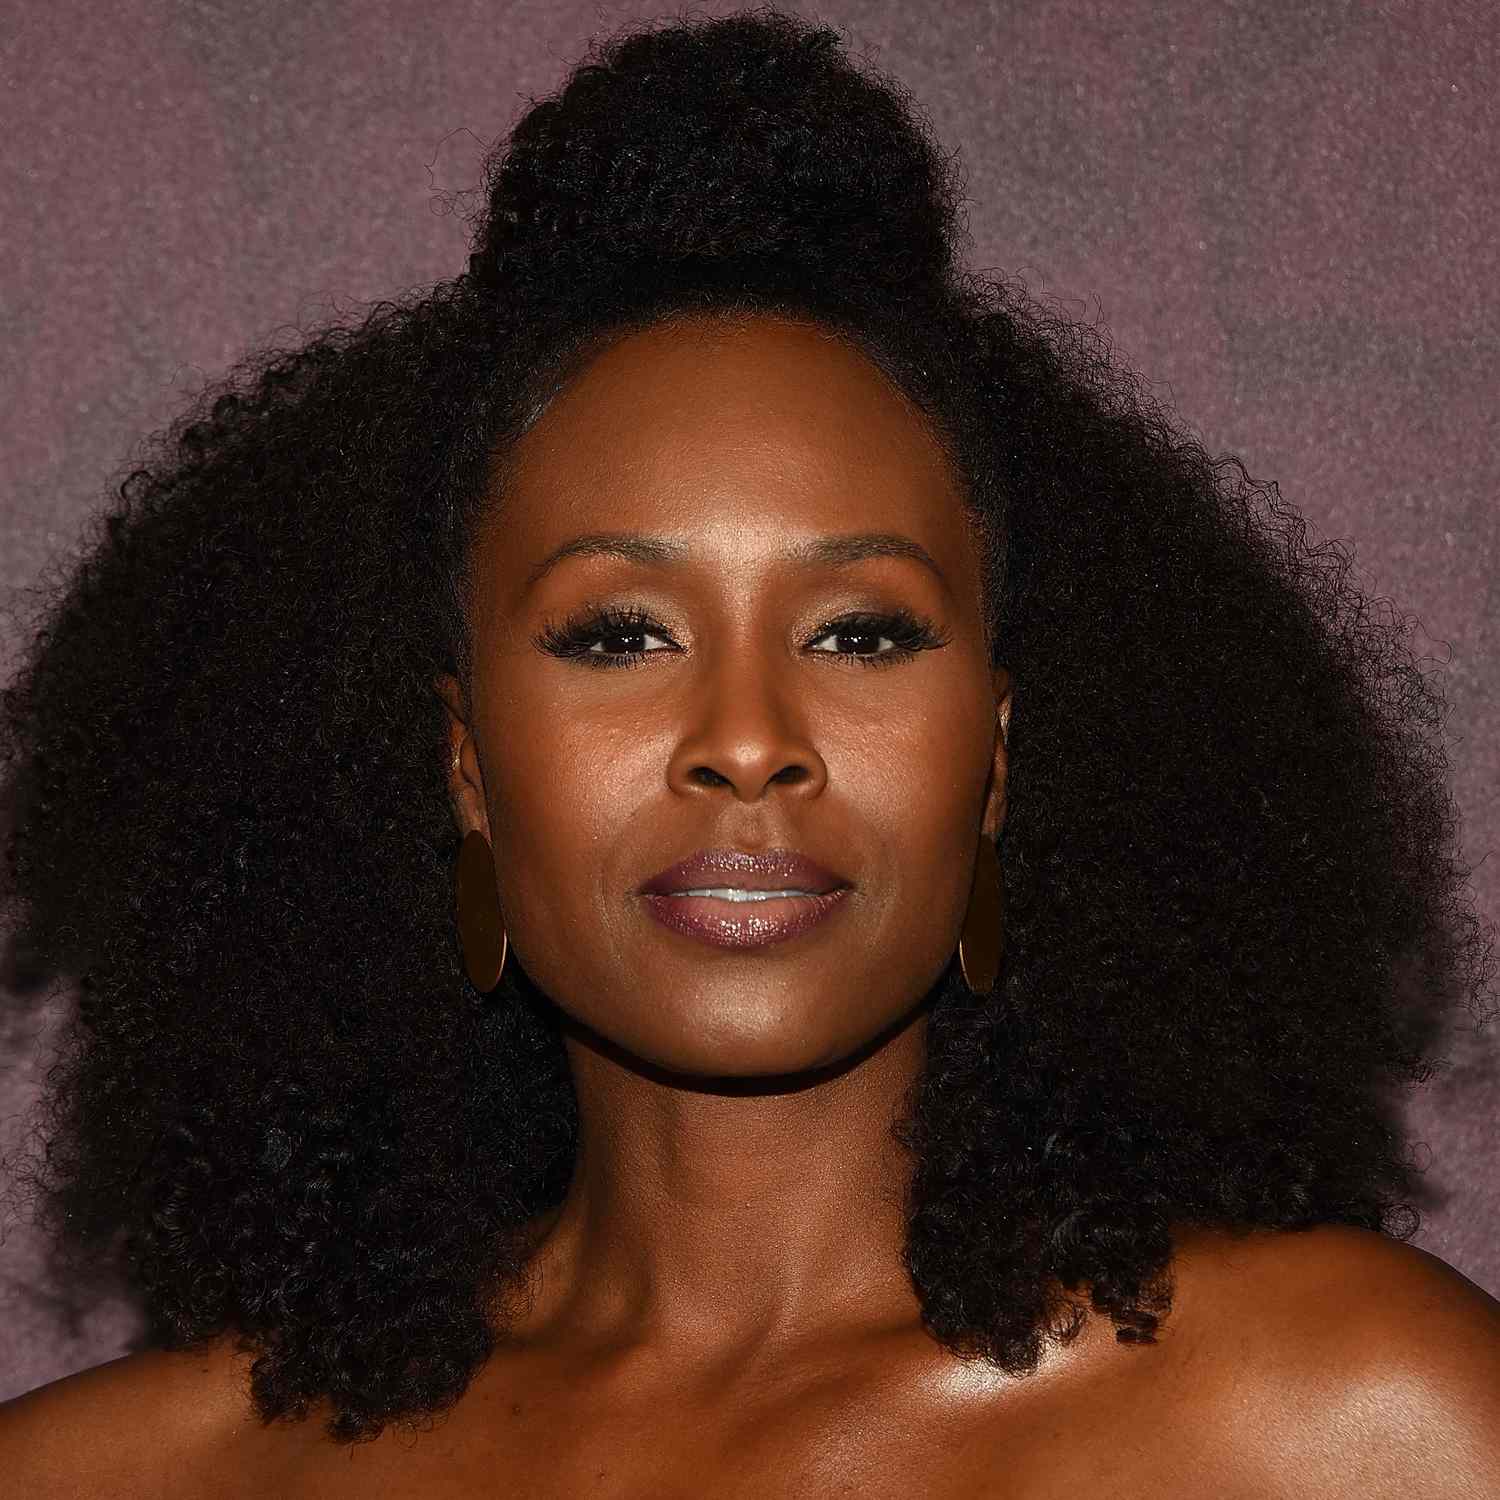 zoomed in picture of Sydelle Noel, with natural afro curls and top section of hair pulled into large bun on top of head